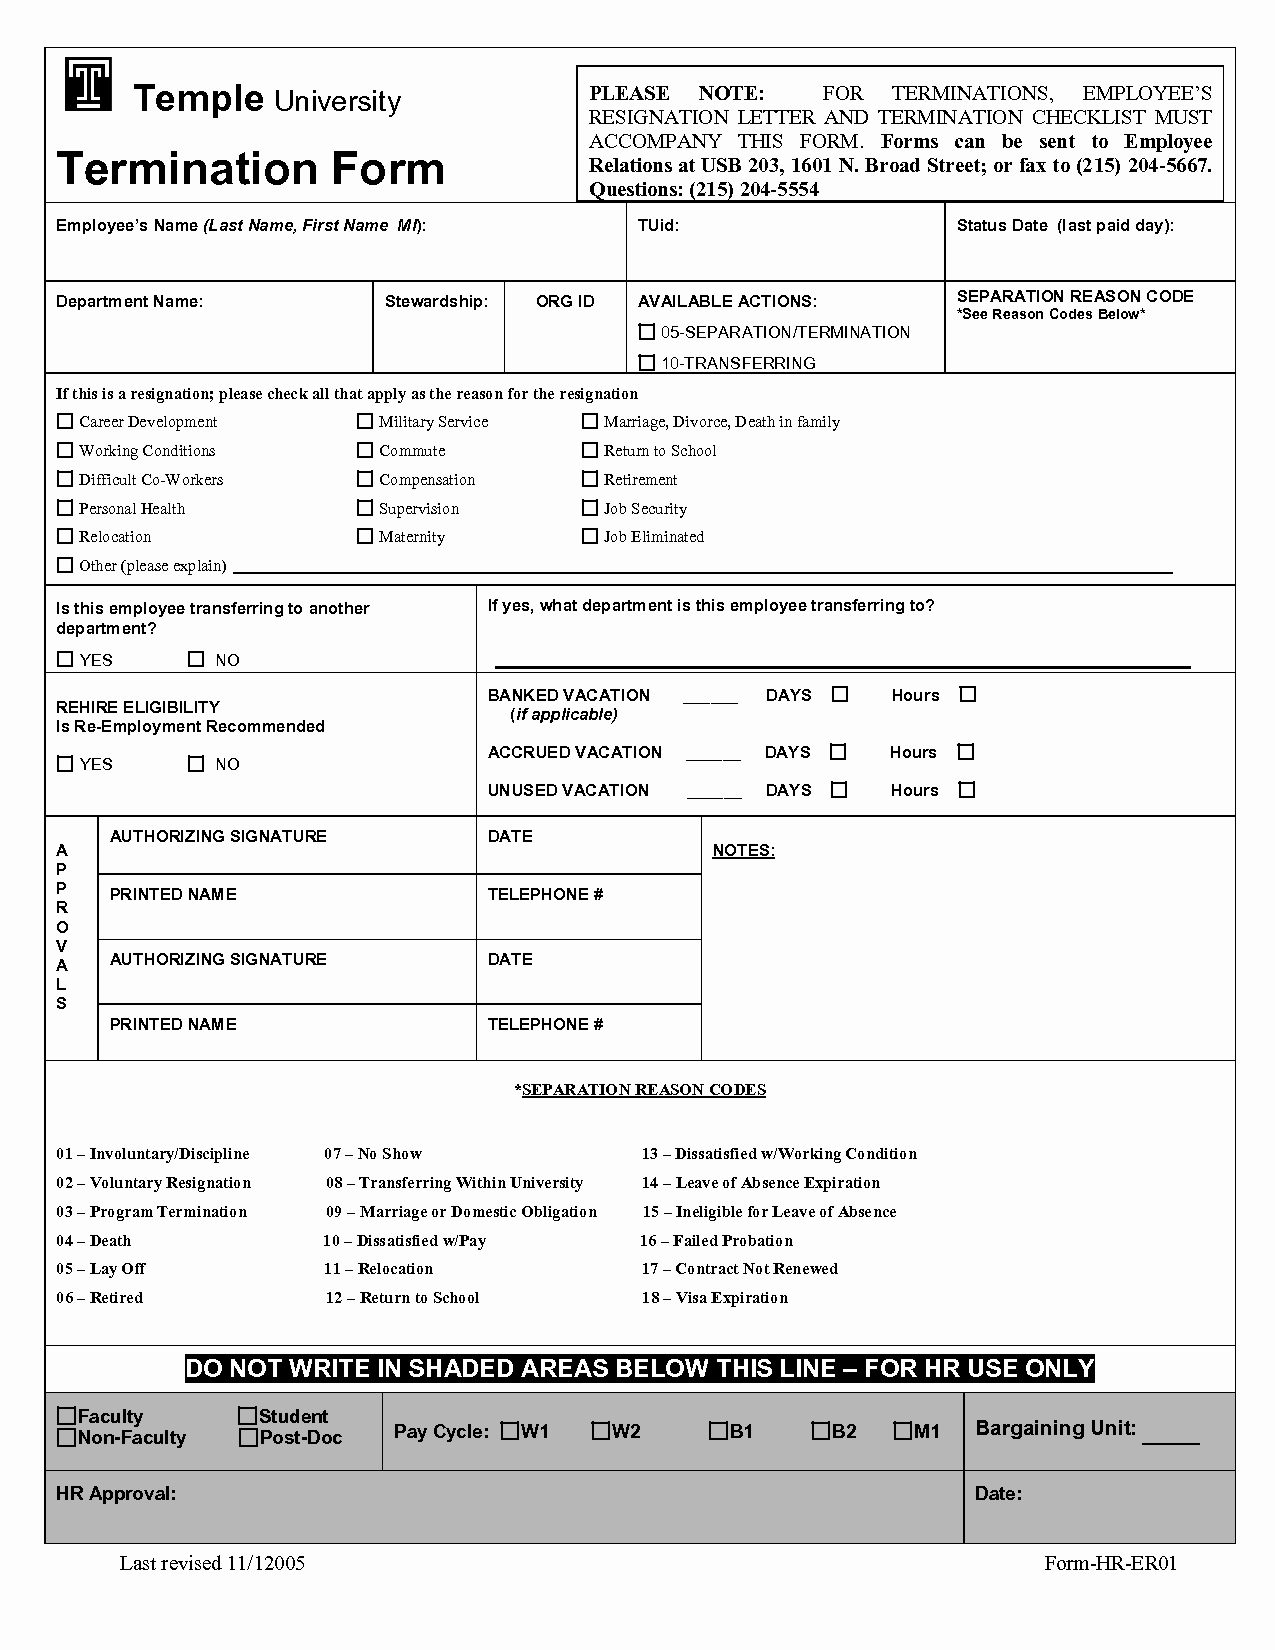 Employee Separation form Template Beautiful Employee Separation form Template Portablegasgrillweber